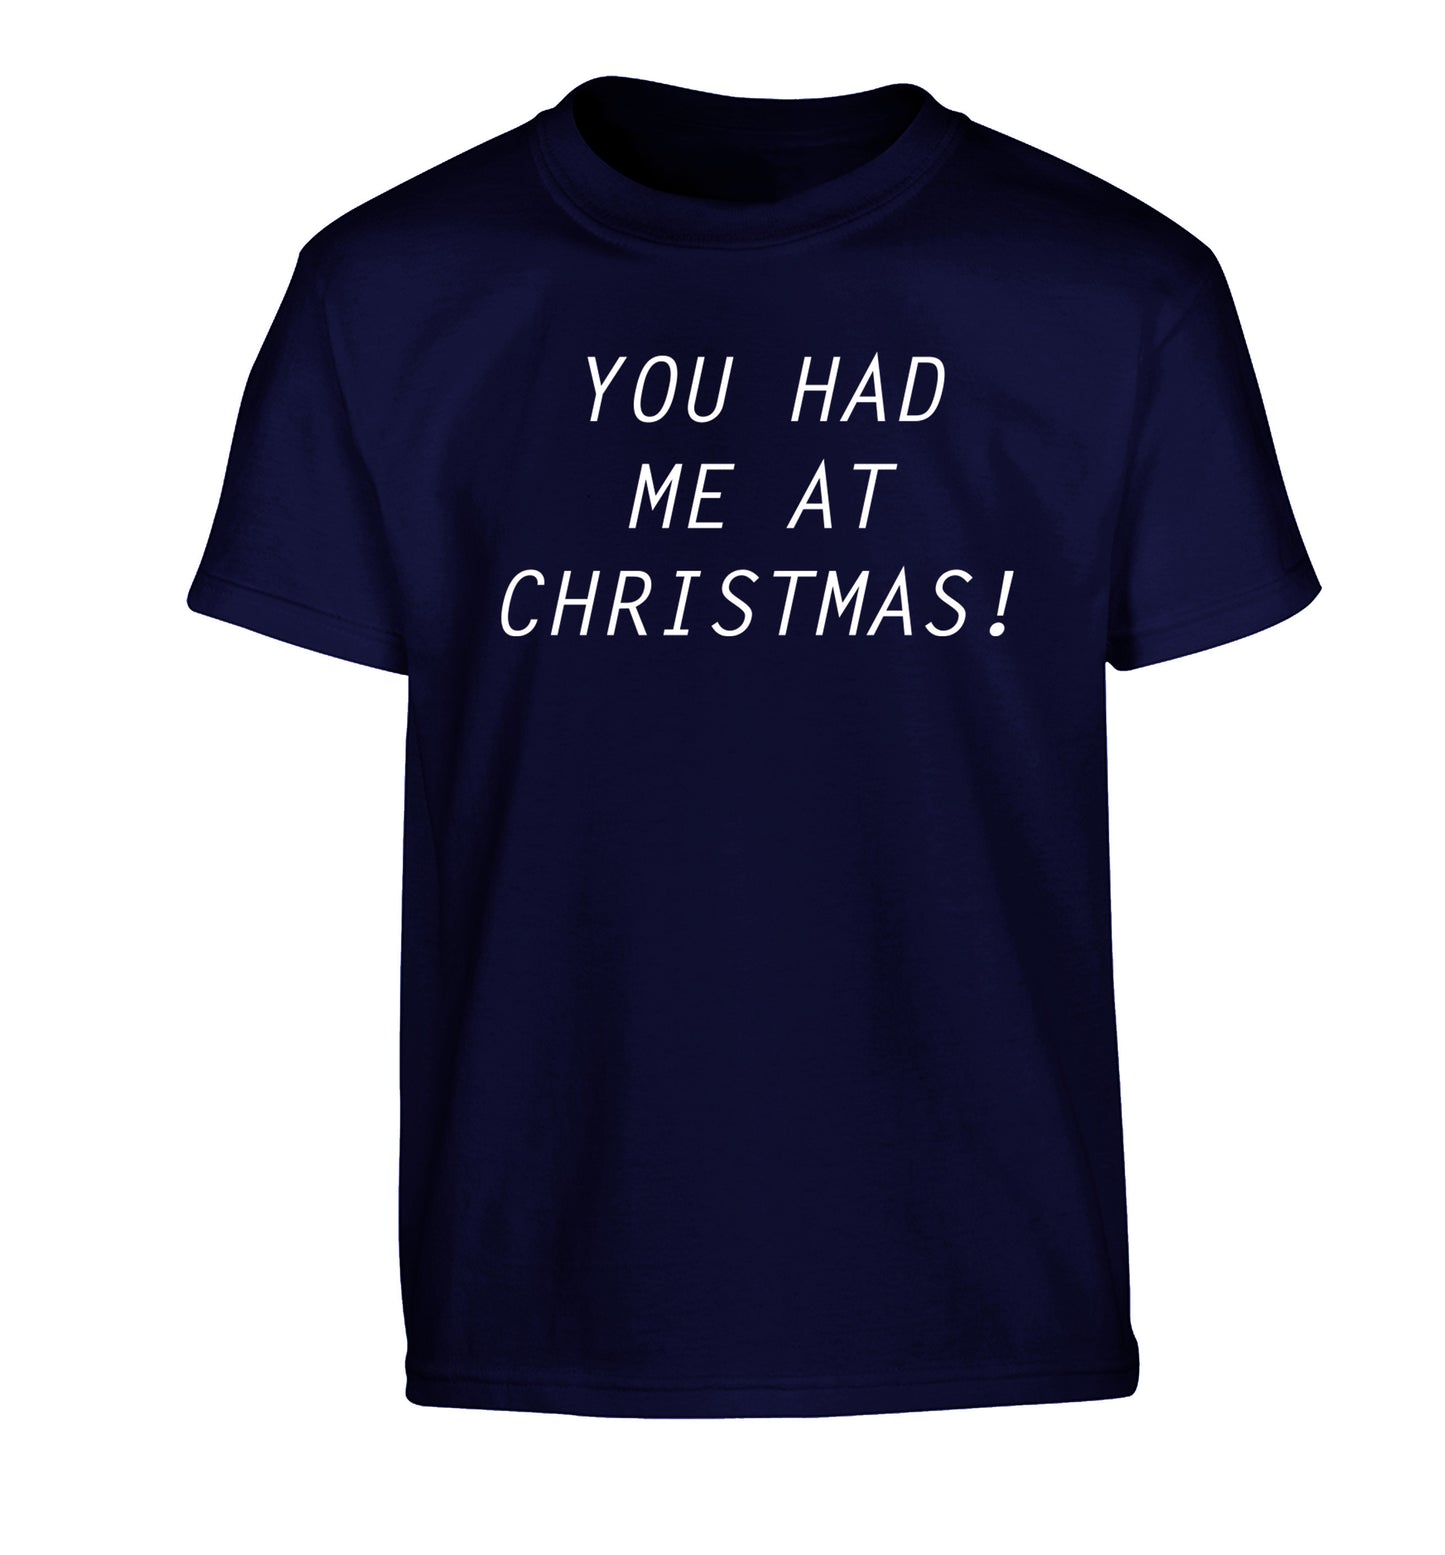 You had me at Christmas Children's navy Tshirt 12-14 Years